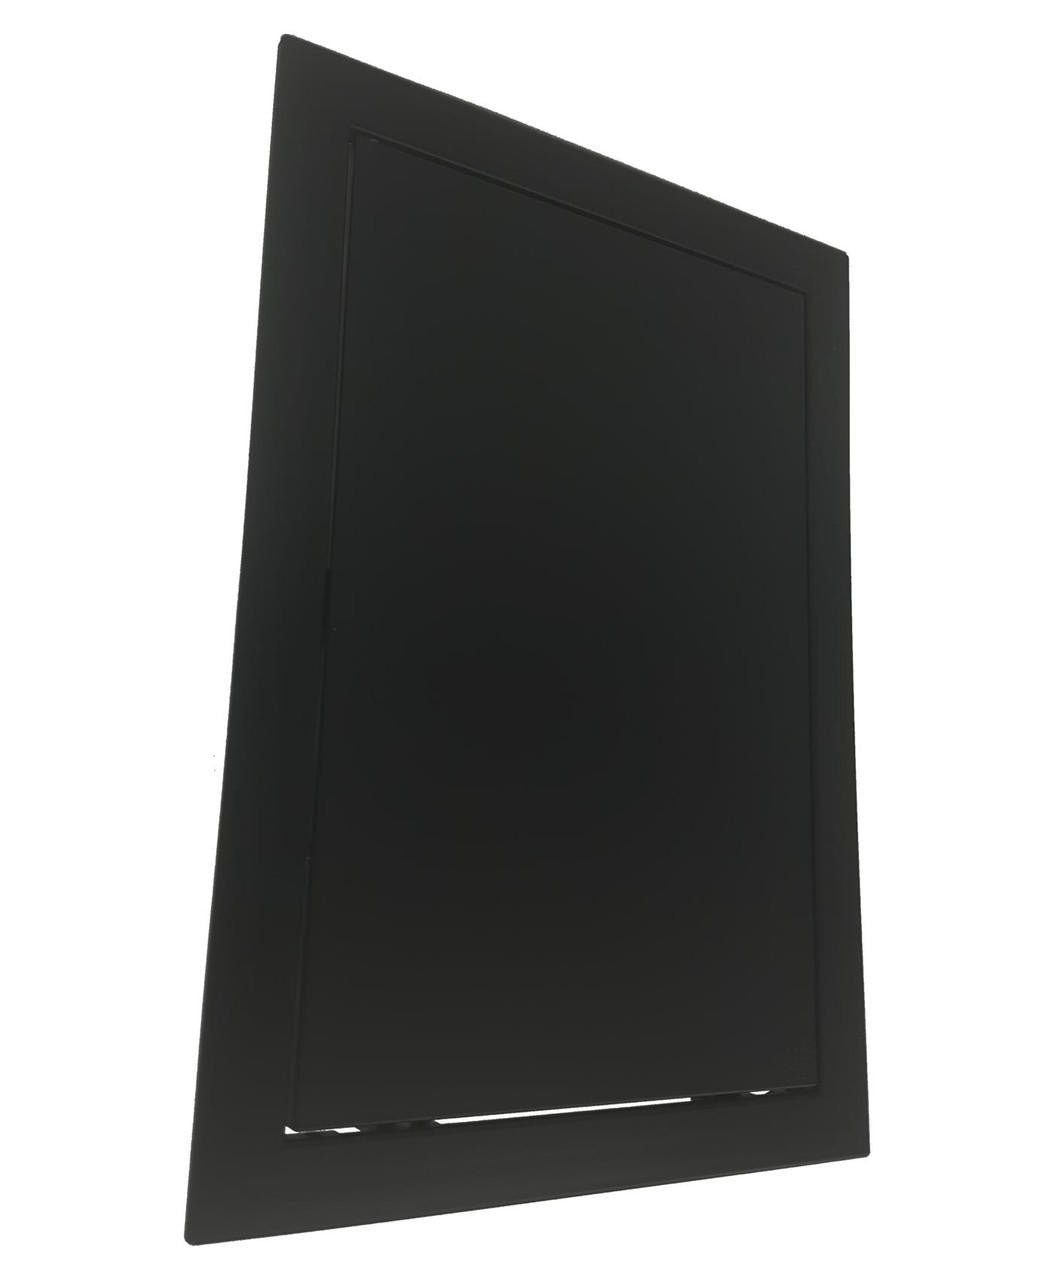  Black Front Access Inspection Panel Plastic Concealed Wall Hatch Check Doors 